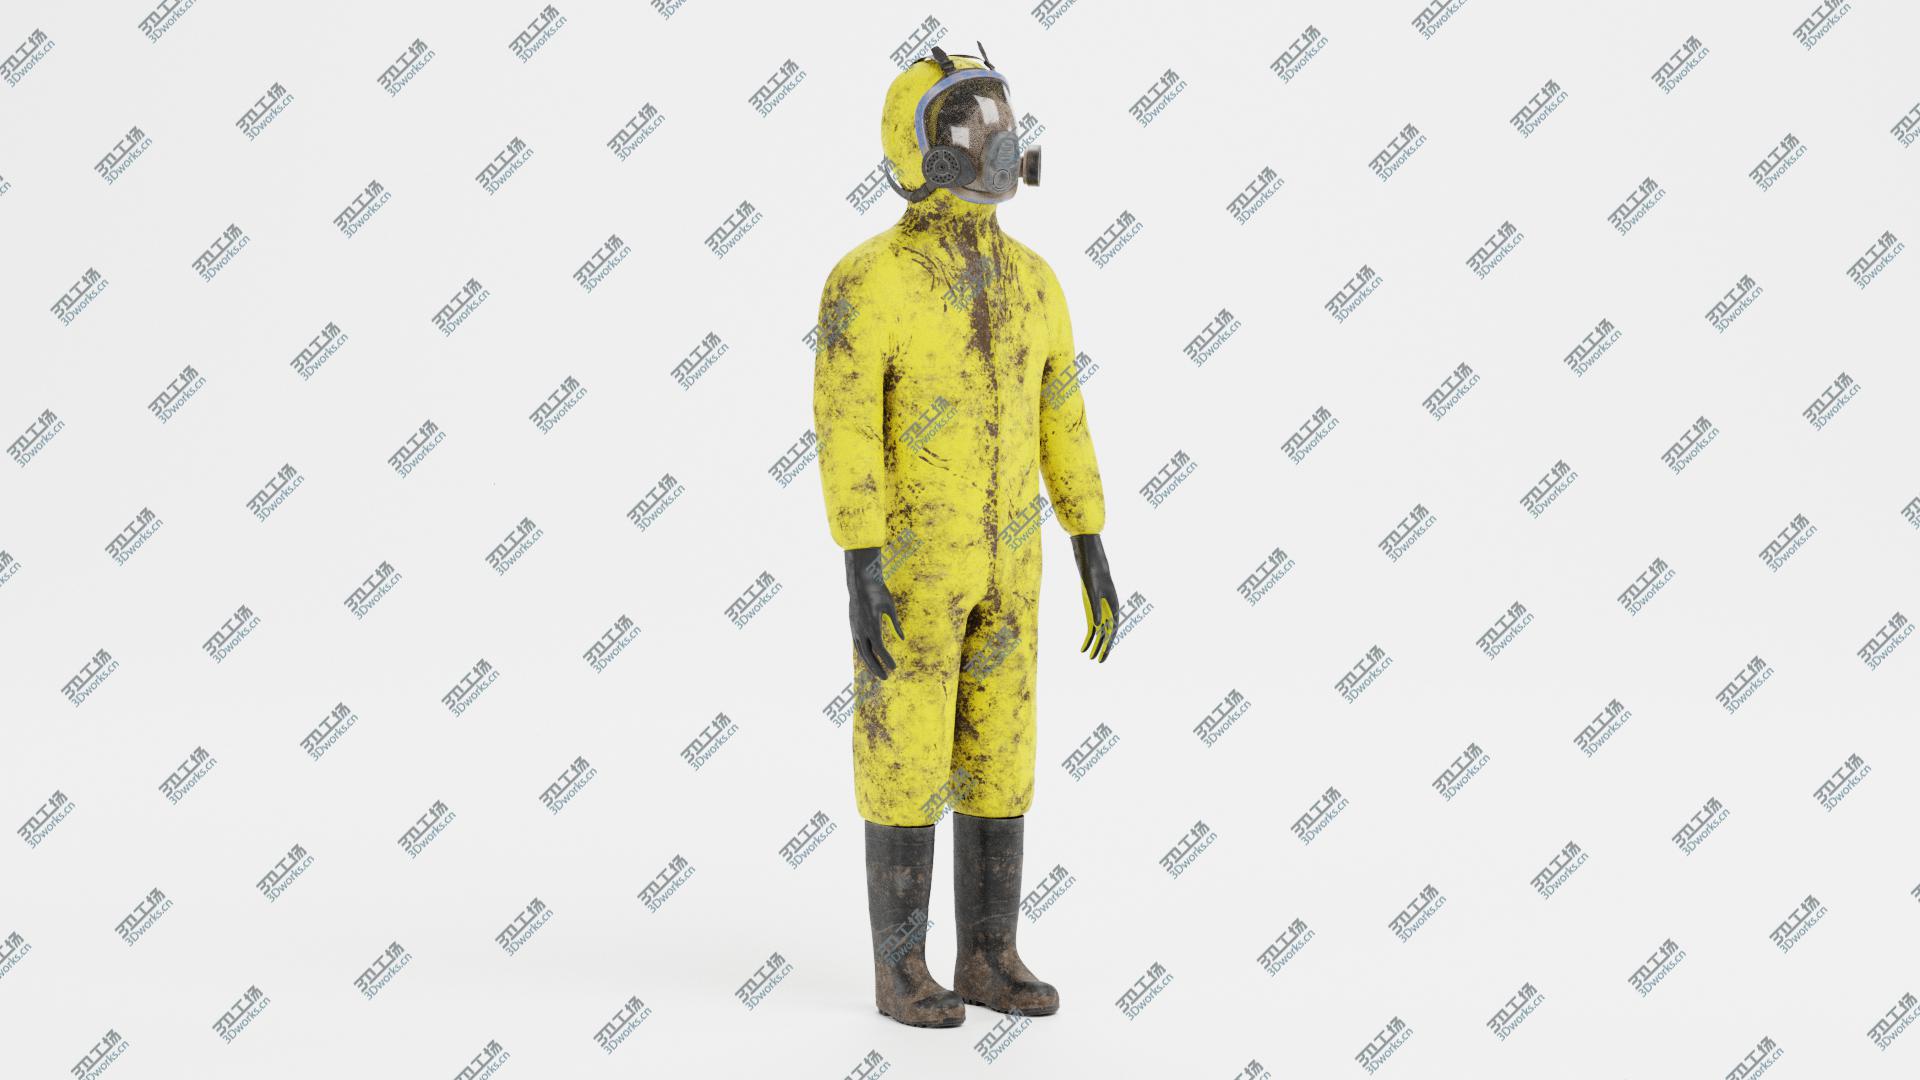 images/goods_img/202104093/3D Protective Suit 2 model/3.jpg